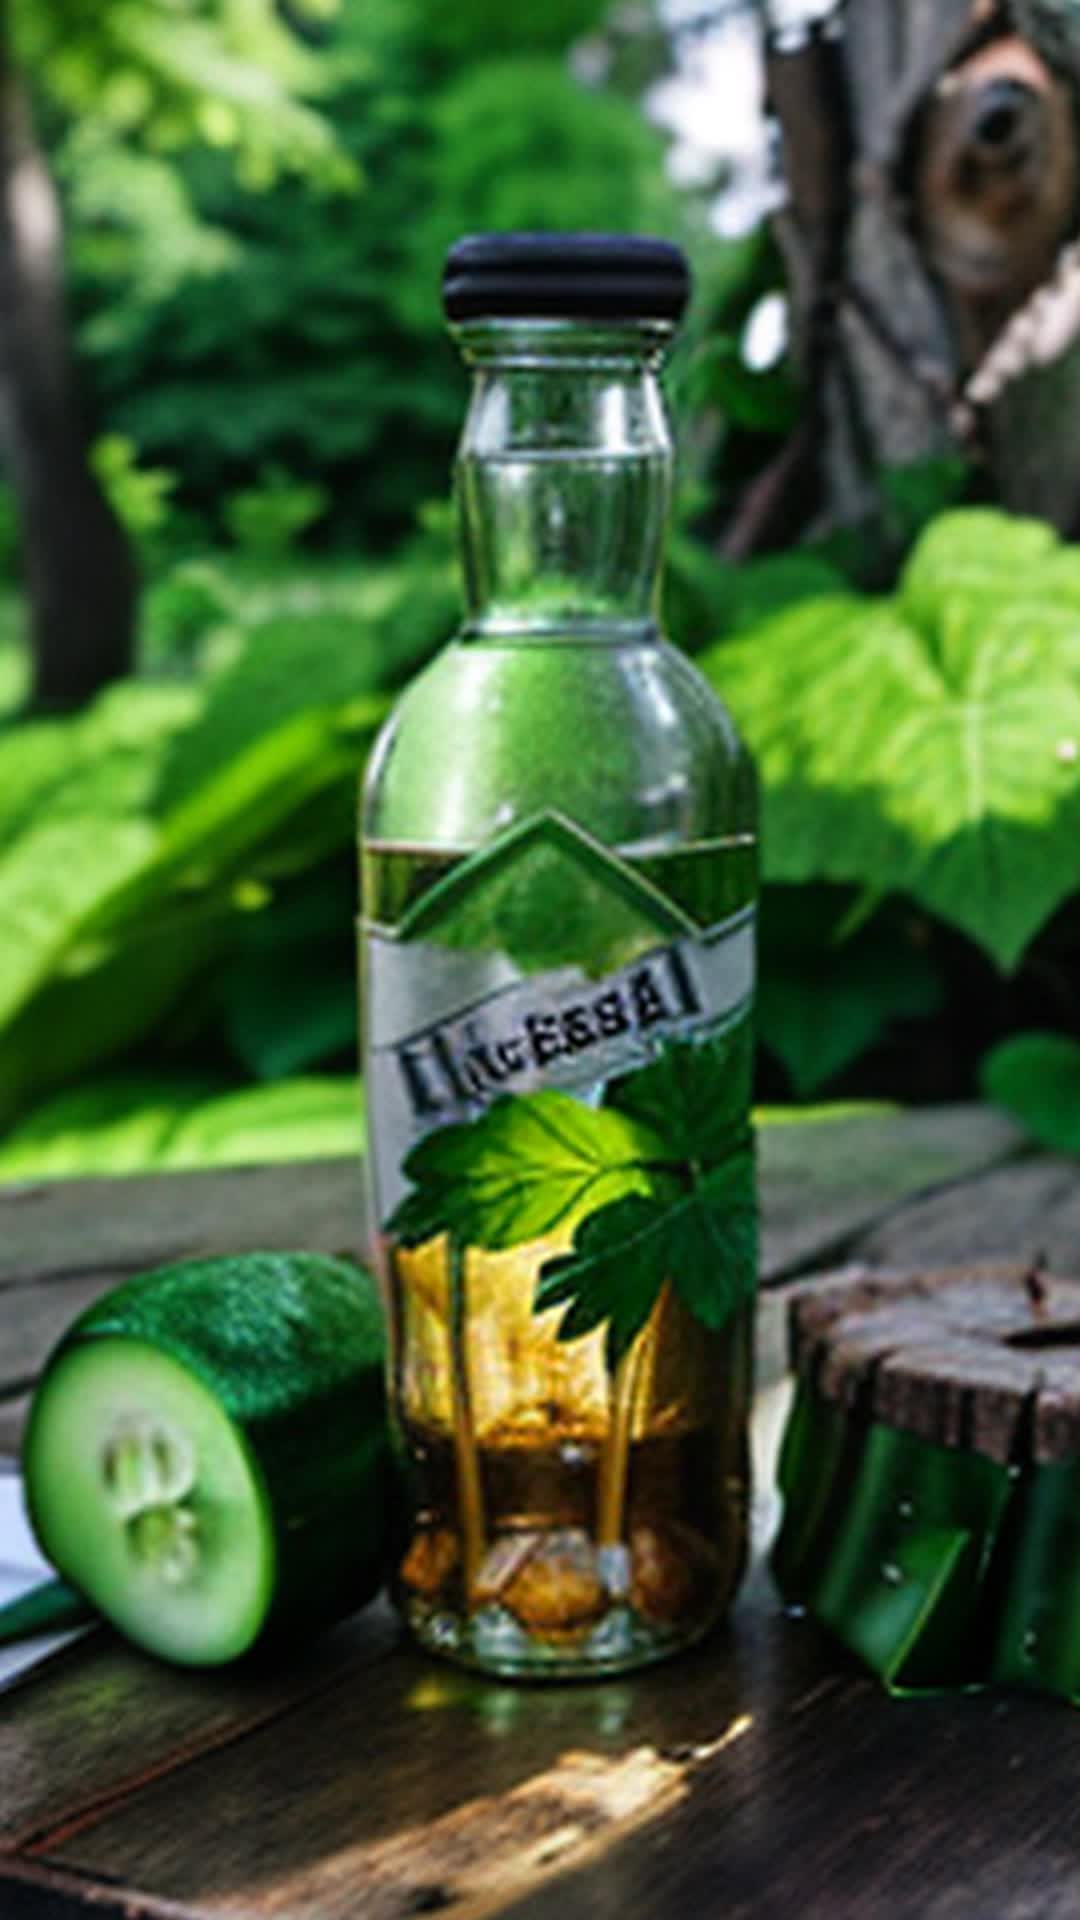 paper glass, bottle of vodka, herring on newspaper, pickled cucumber, rustic tree stump, outdoor setting, lush green forest background, sunlight filtering through leaves, soft shadows, highly detailed, sharp focus, natural colors, closeup shot, cinematic feel